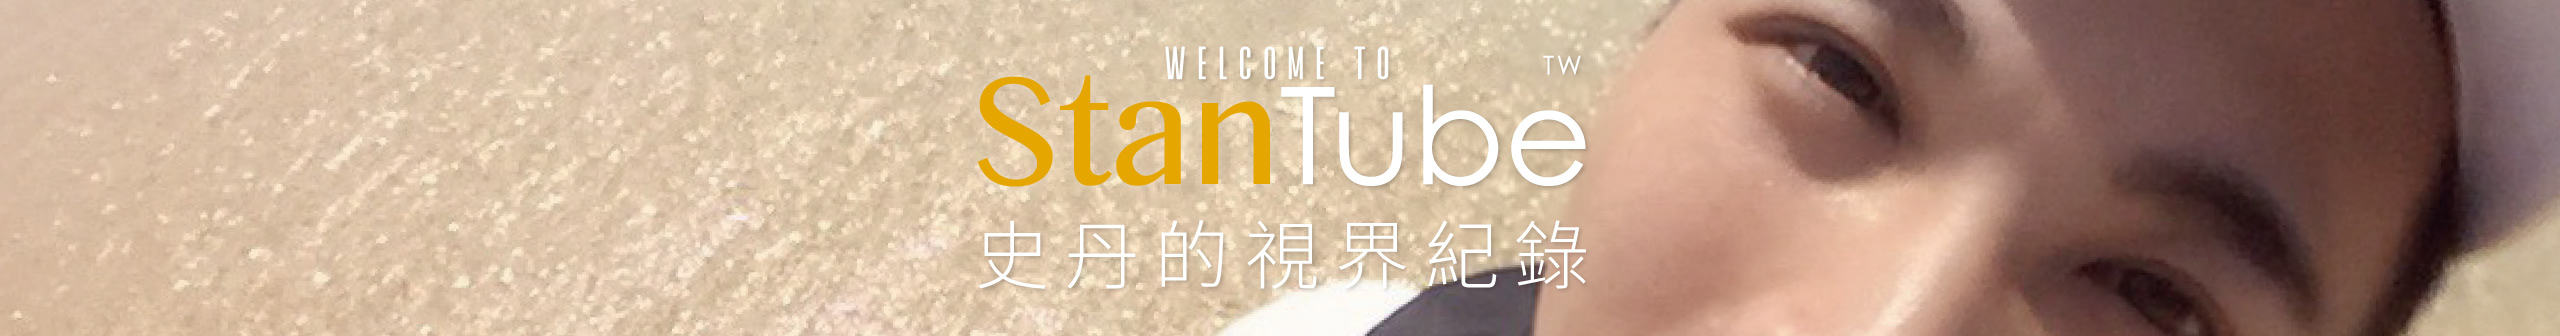 Stan Huang's profile banner